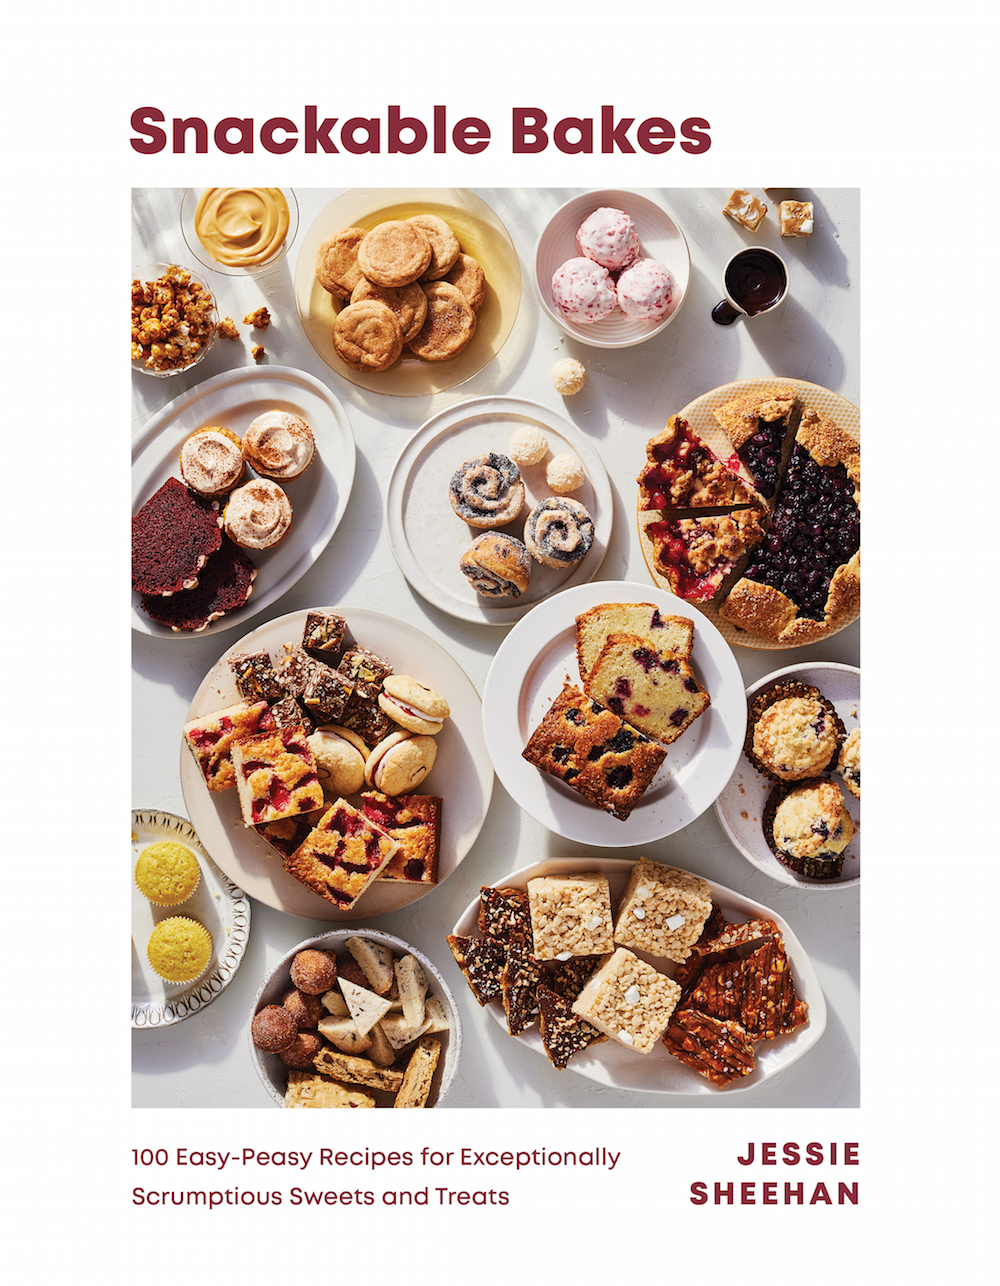 IC Book Launch: Snackable Bakes by Jessie Sheehan